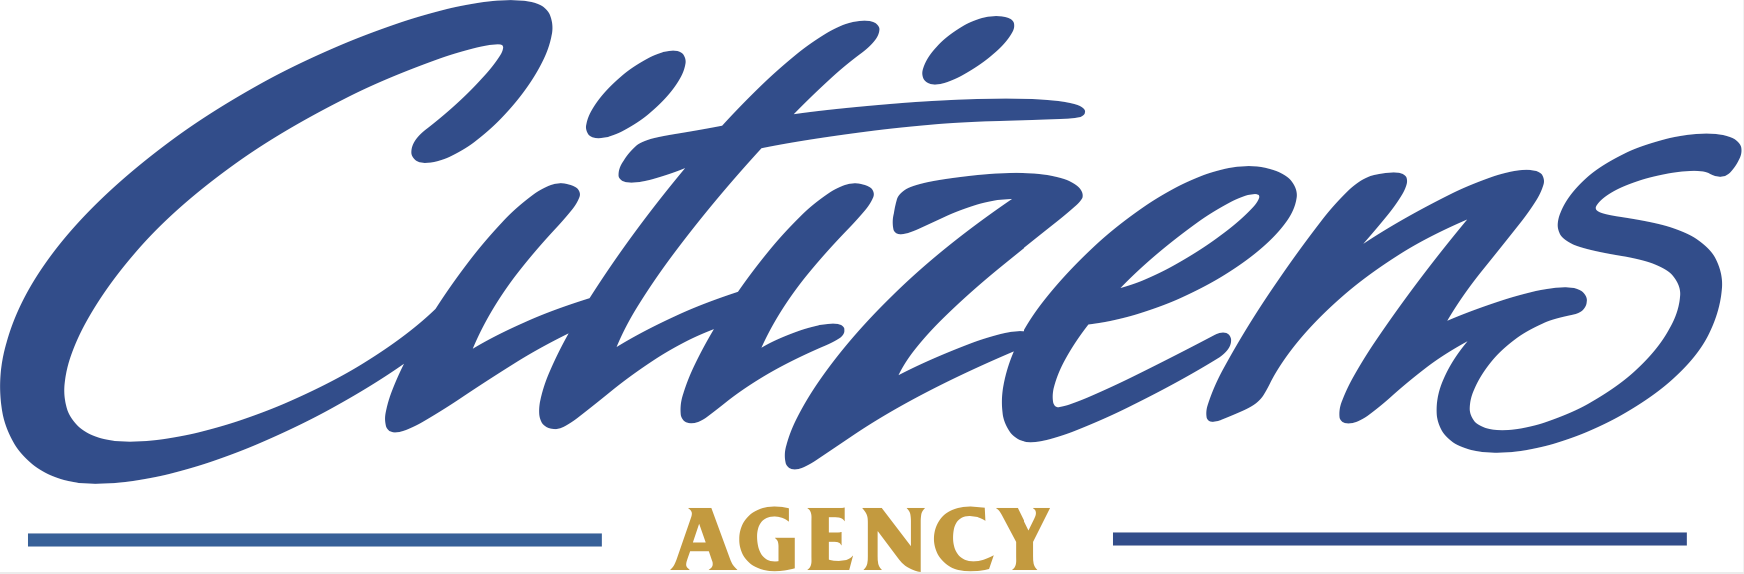 Citizens Agency Footer Logo